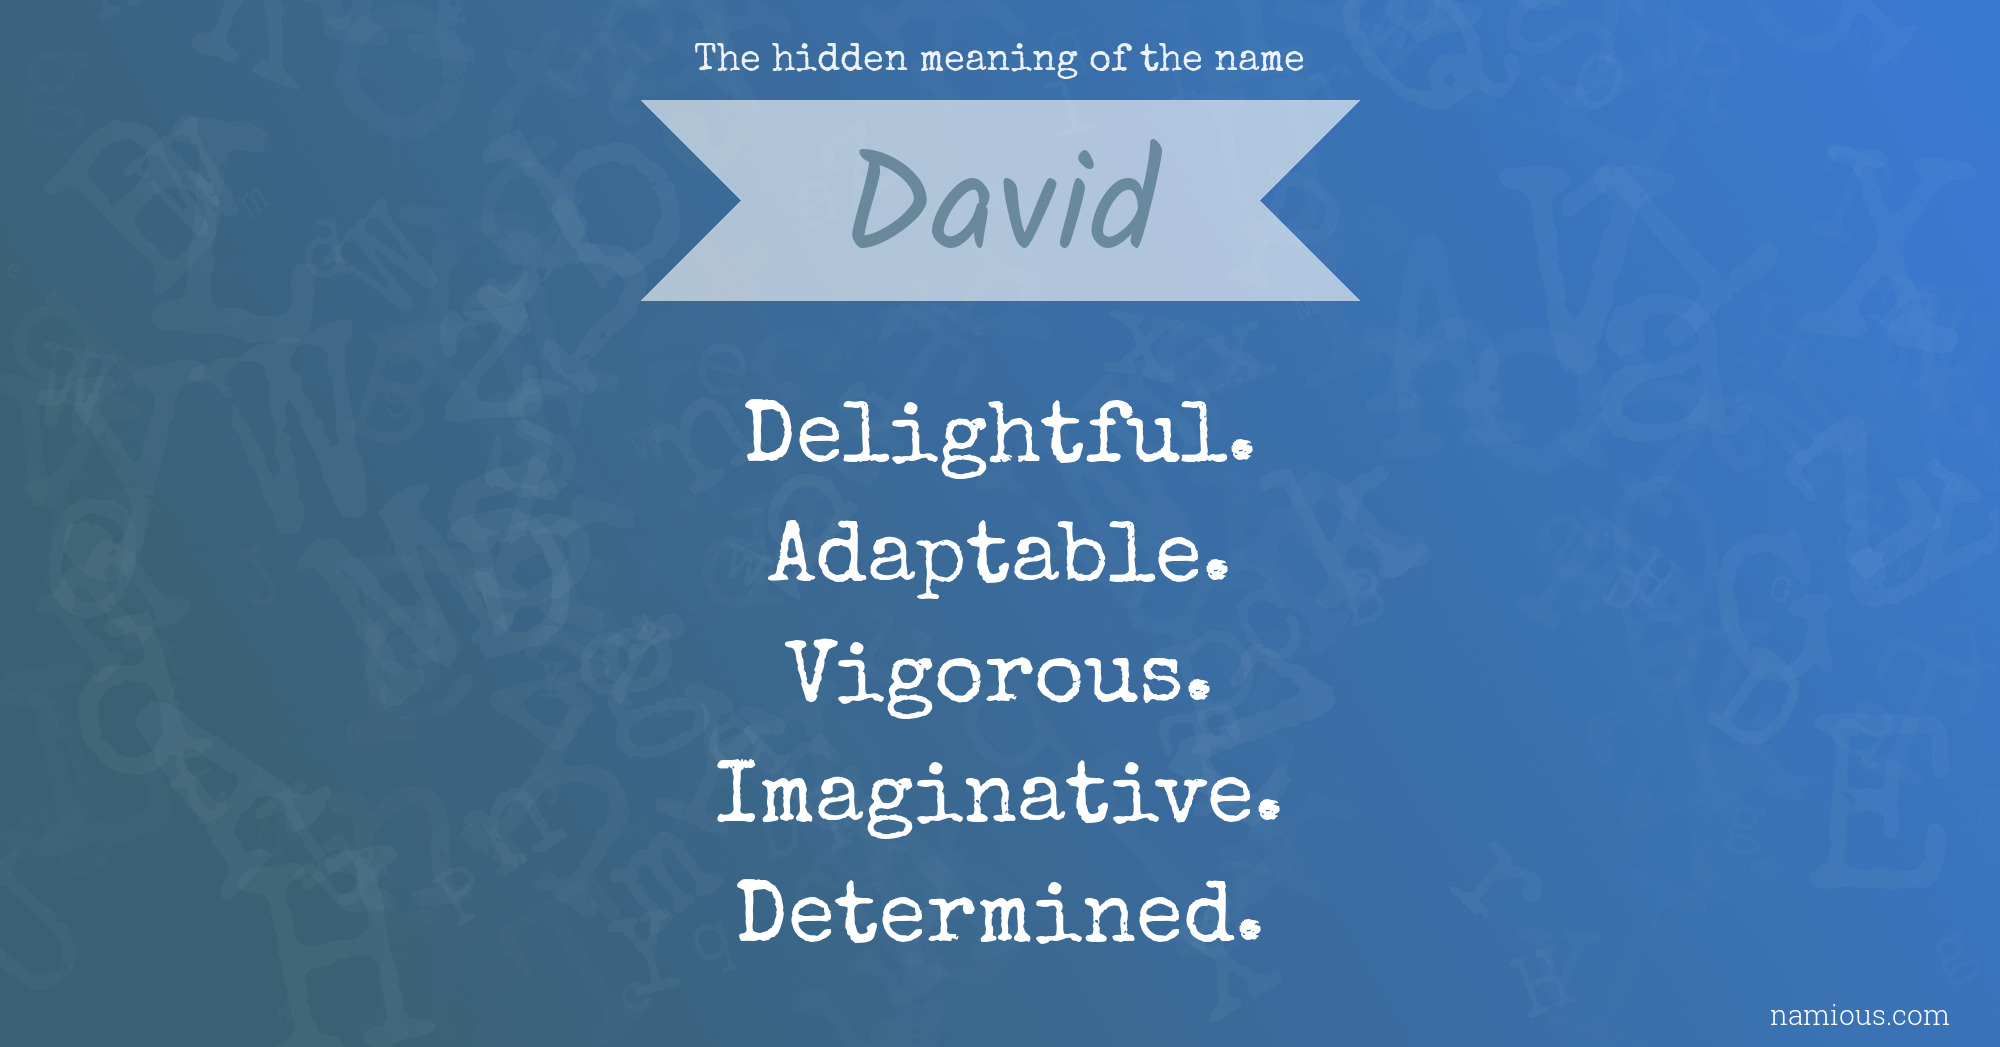 The hidden meaning of the name David